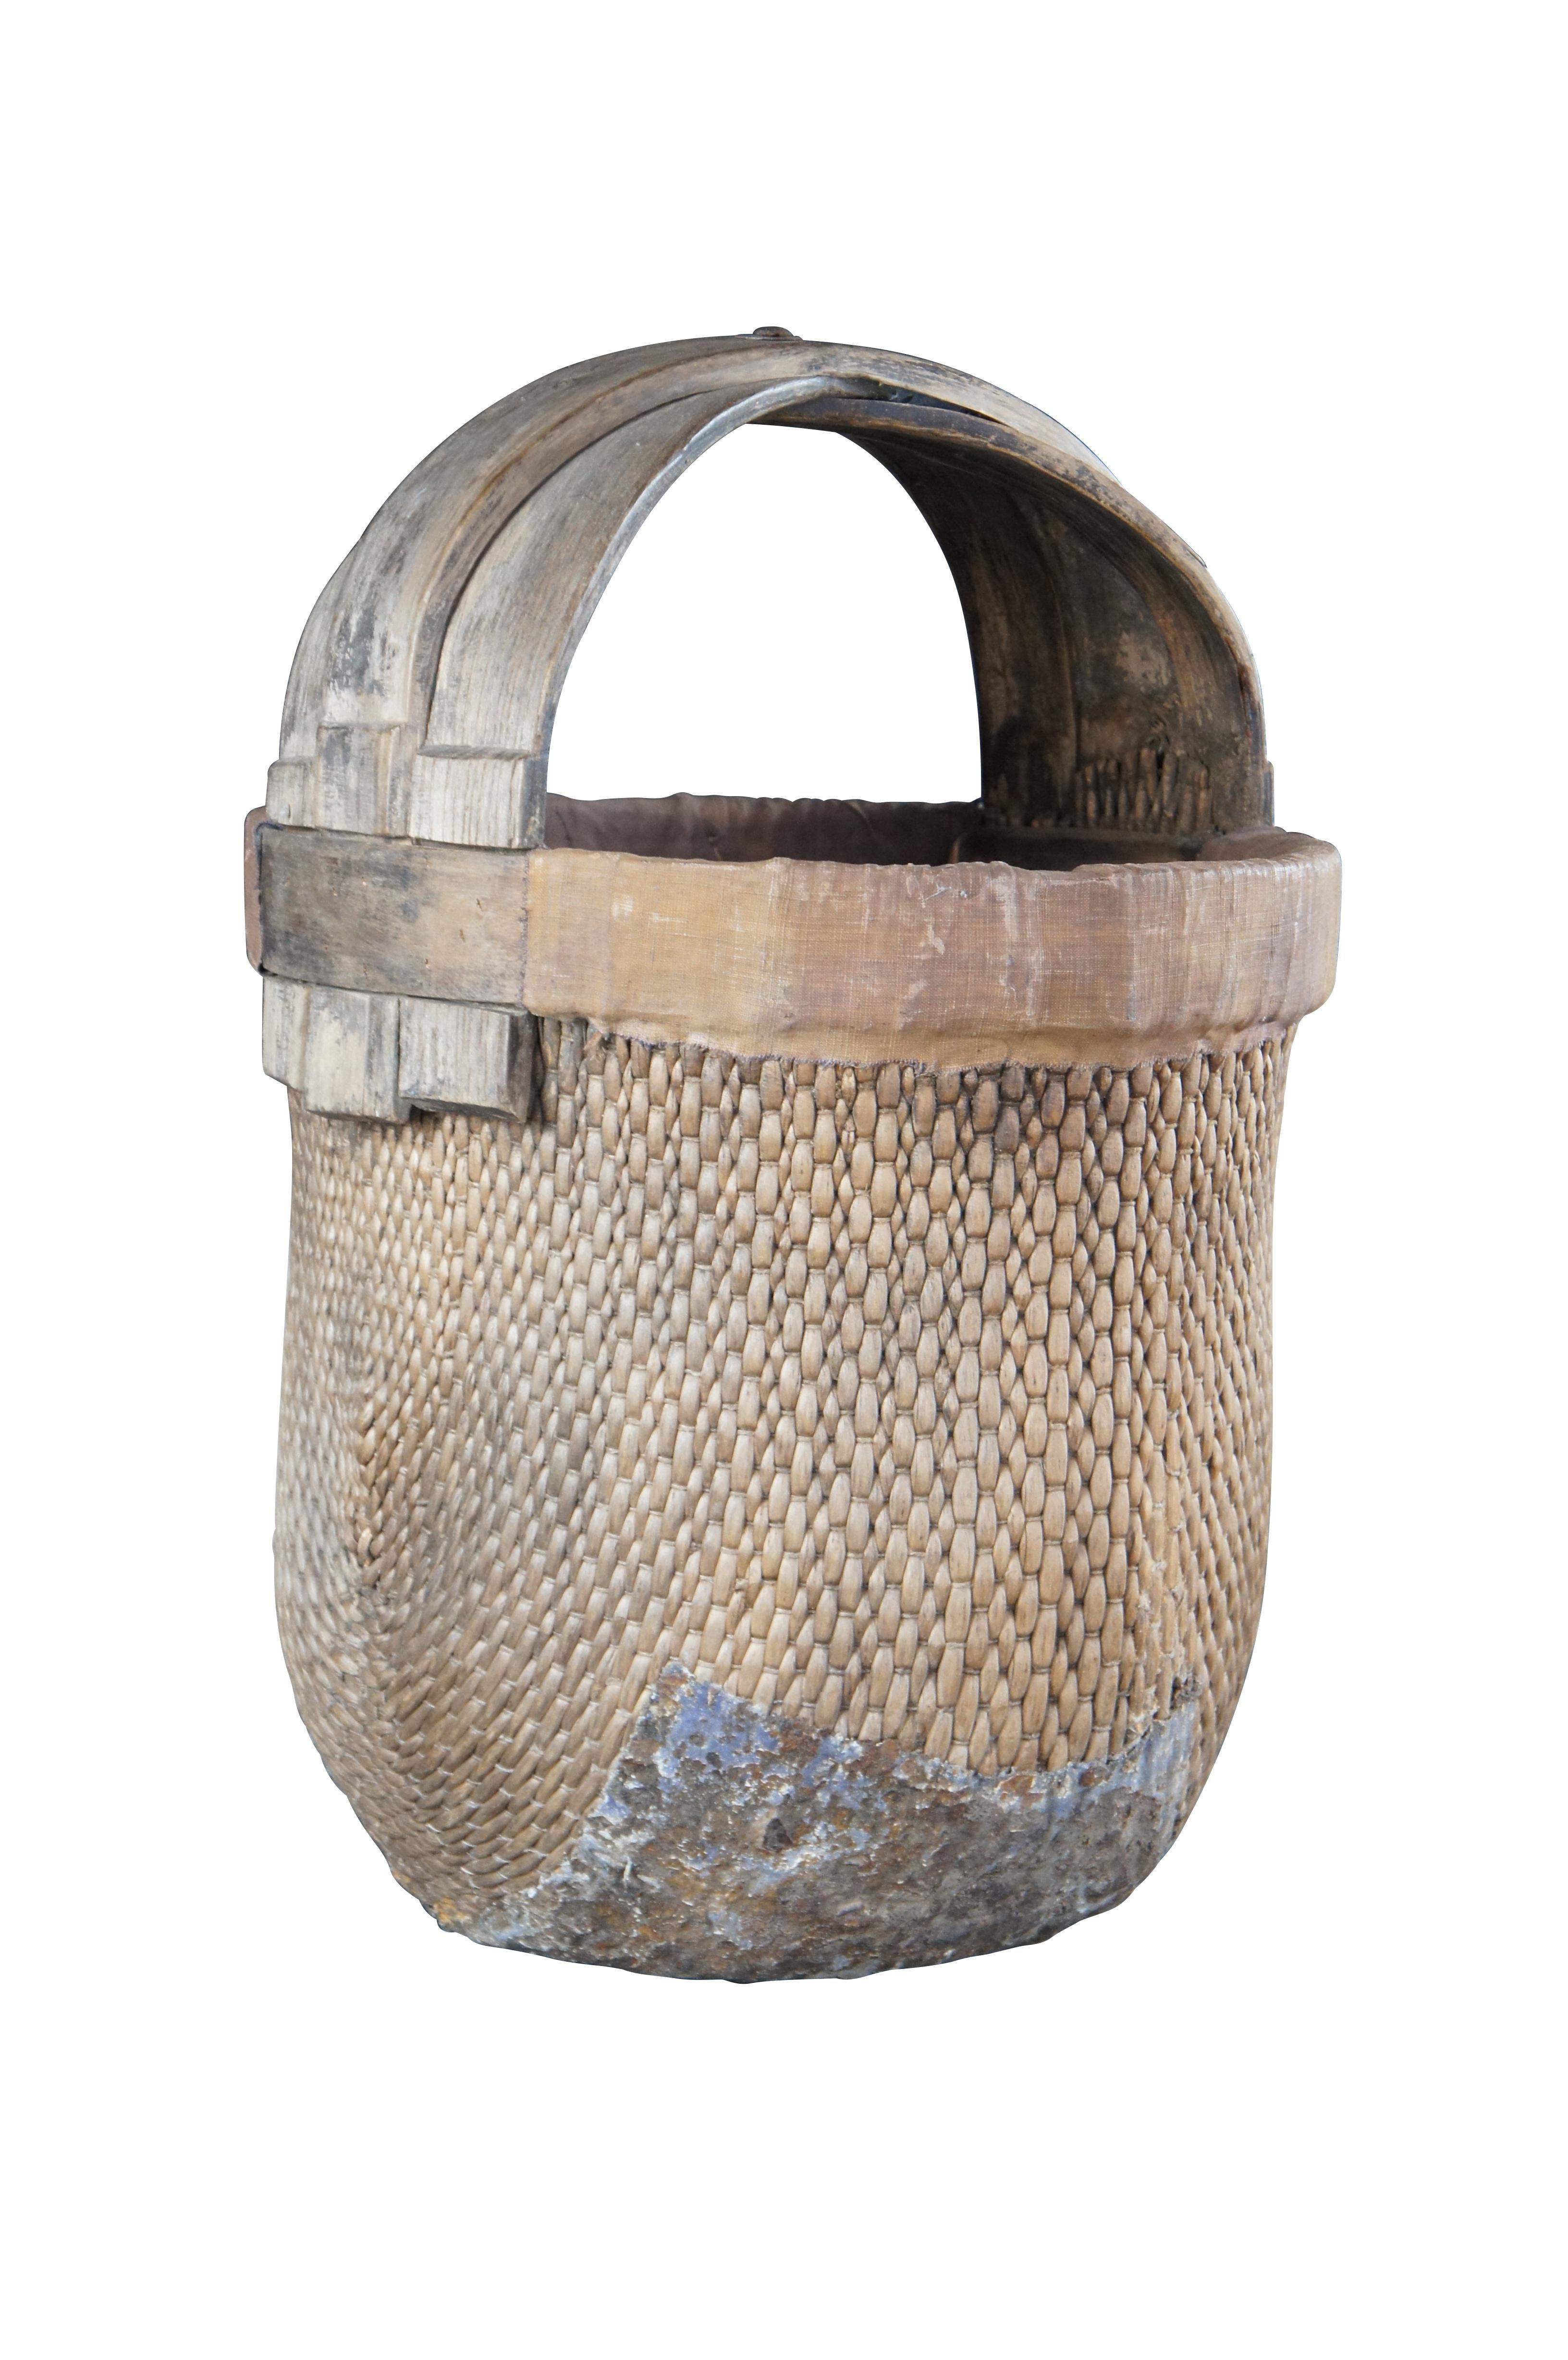 Early 20th Century Chinese Rice Basket. Made from woven reed with a bentwood handle.

Dimensions:
16